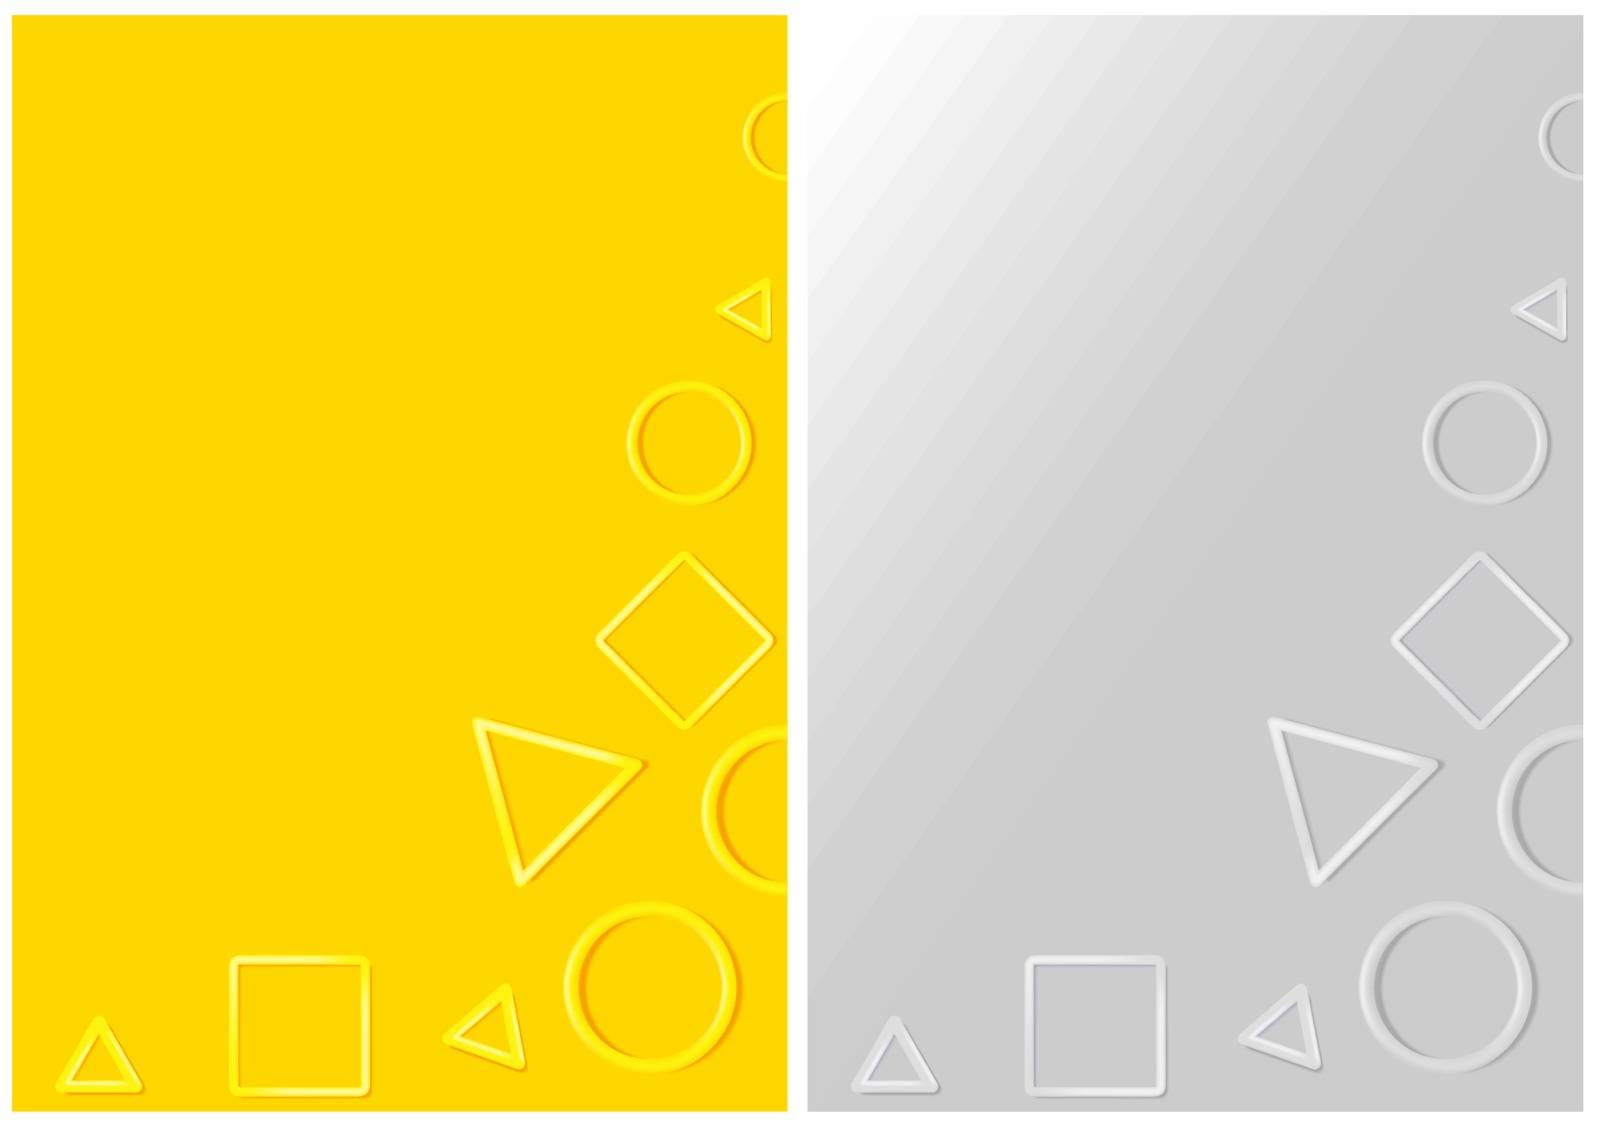 Different 3D Plastic Geometric Shapes on Backgrounds - Set of Yellow and Grayscale Illustration, Vector